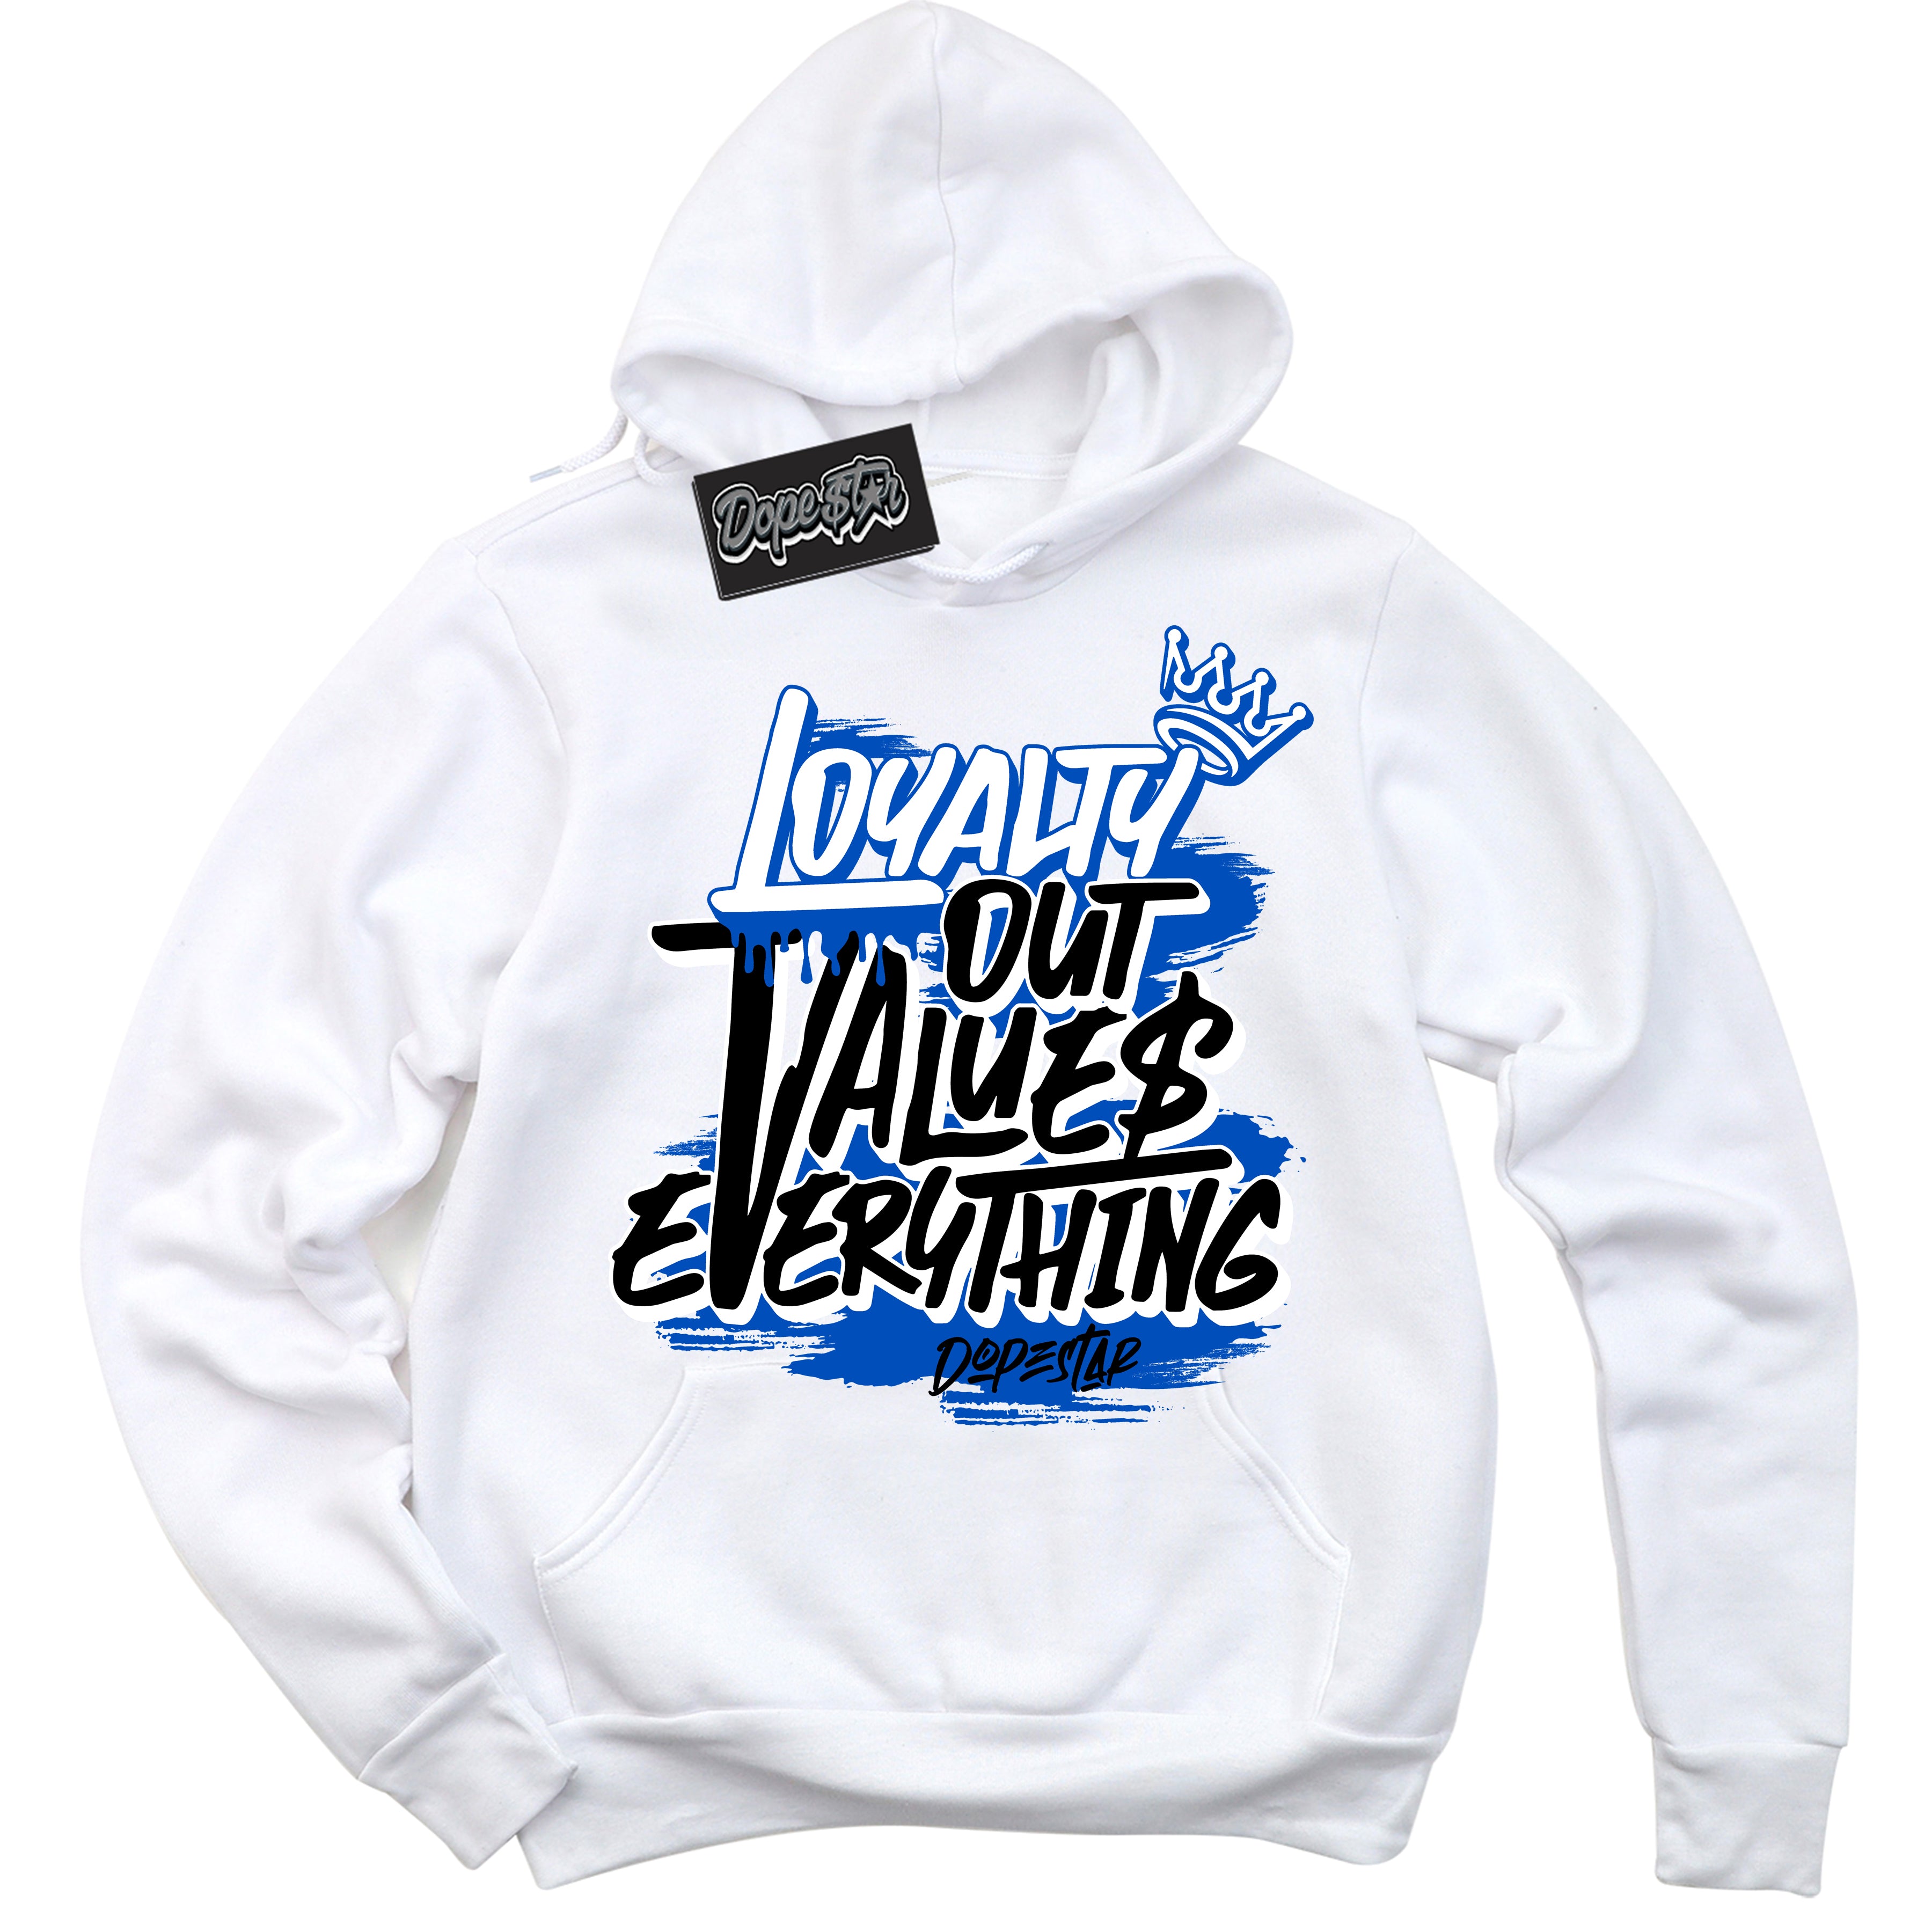 Cool White Hoodie with “ Loyalty Out Values Everything ”  design that Perfectly Matches Royal Reimagined 1s Sneakers.